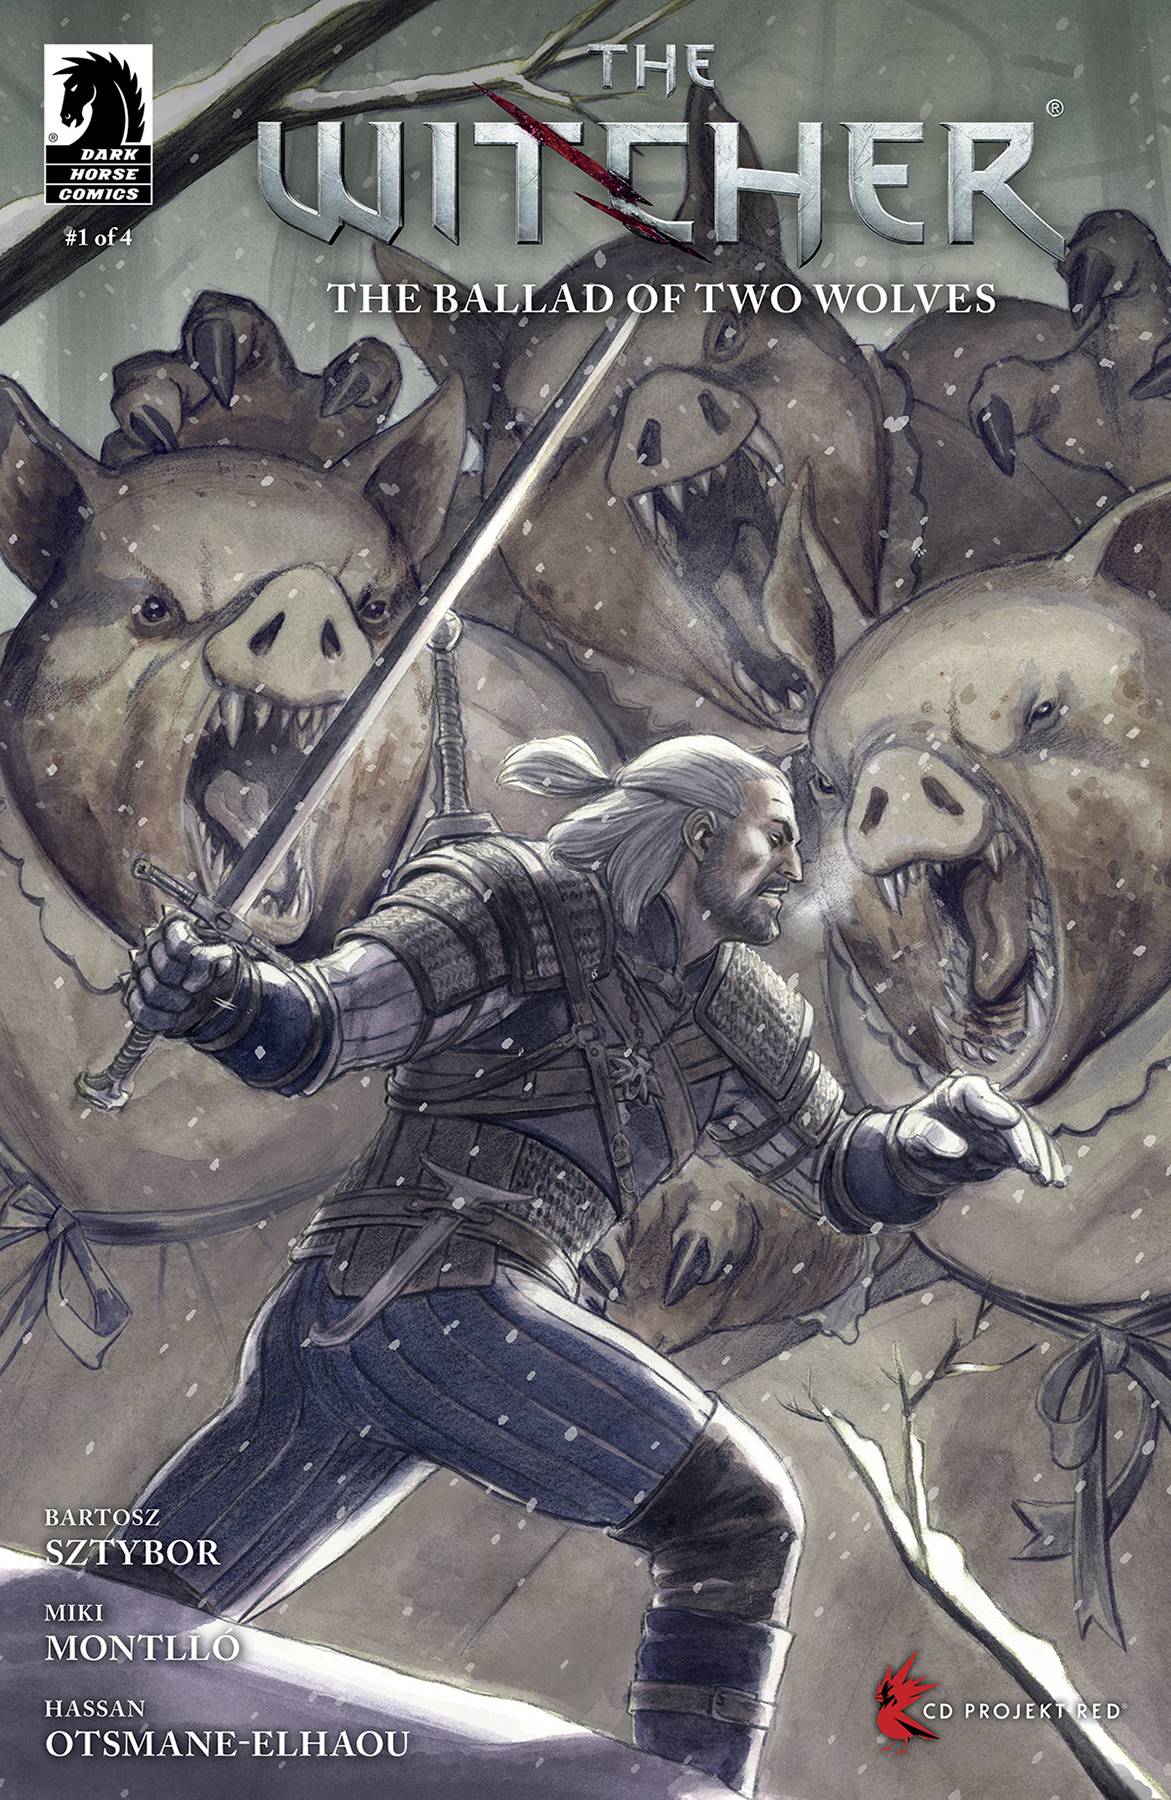 WITCHER THE BALLAD OF TWO WOLVES #1 (OF 4) CVR D LOPEZ